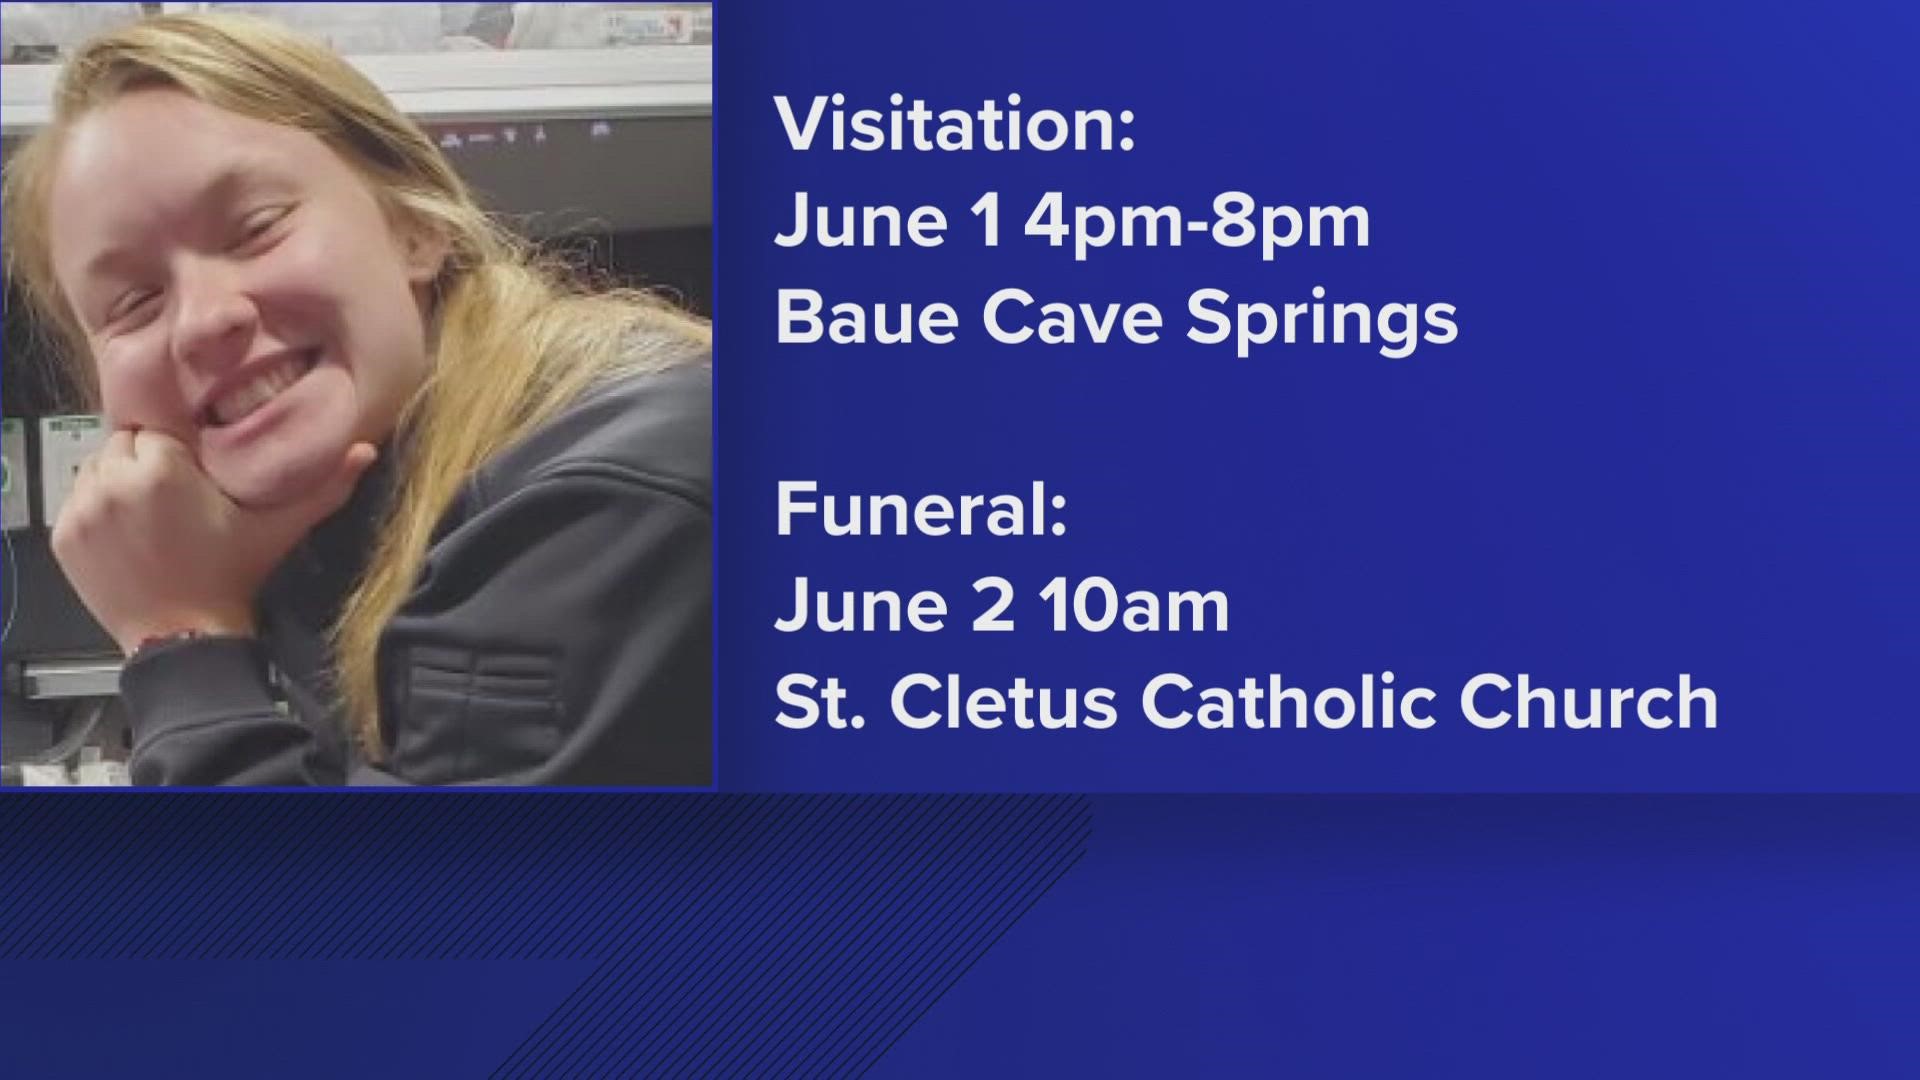 The community is being asked to line the funeral procession route on Thursday.